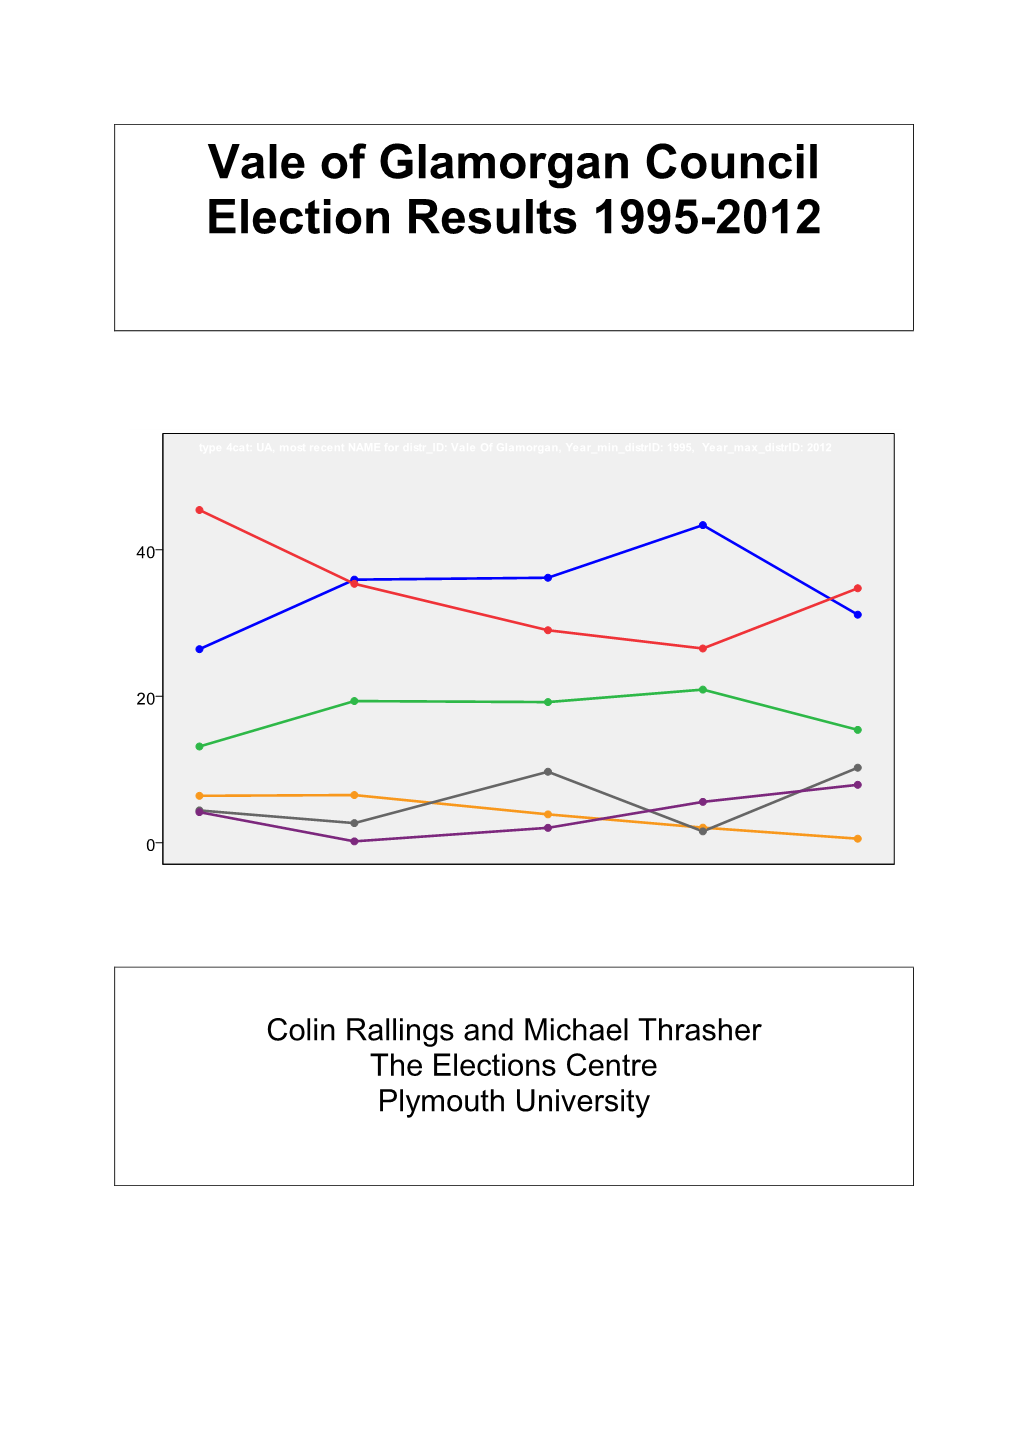 Vale of Glamorgan Council Election Results 1995-2012